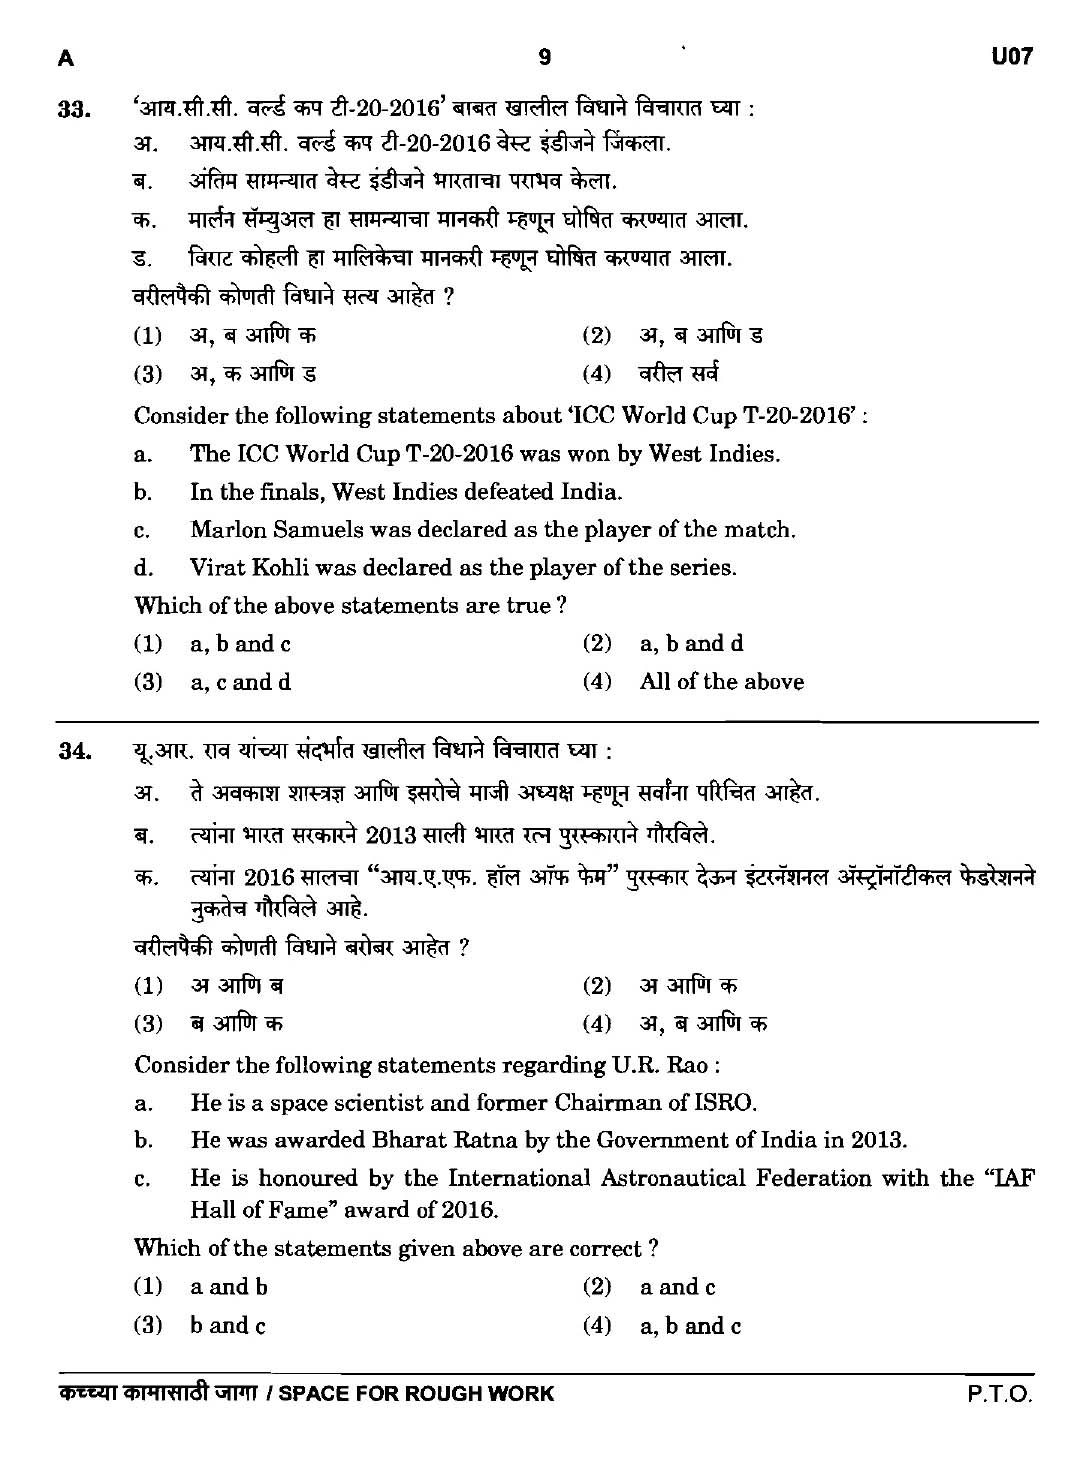 MPSC Agricultural Services Preliminary Exam 2016 Question Paper 8